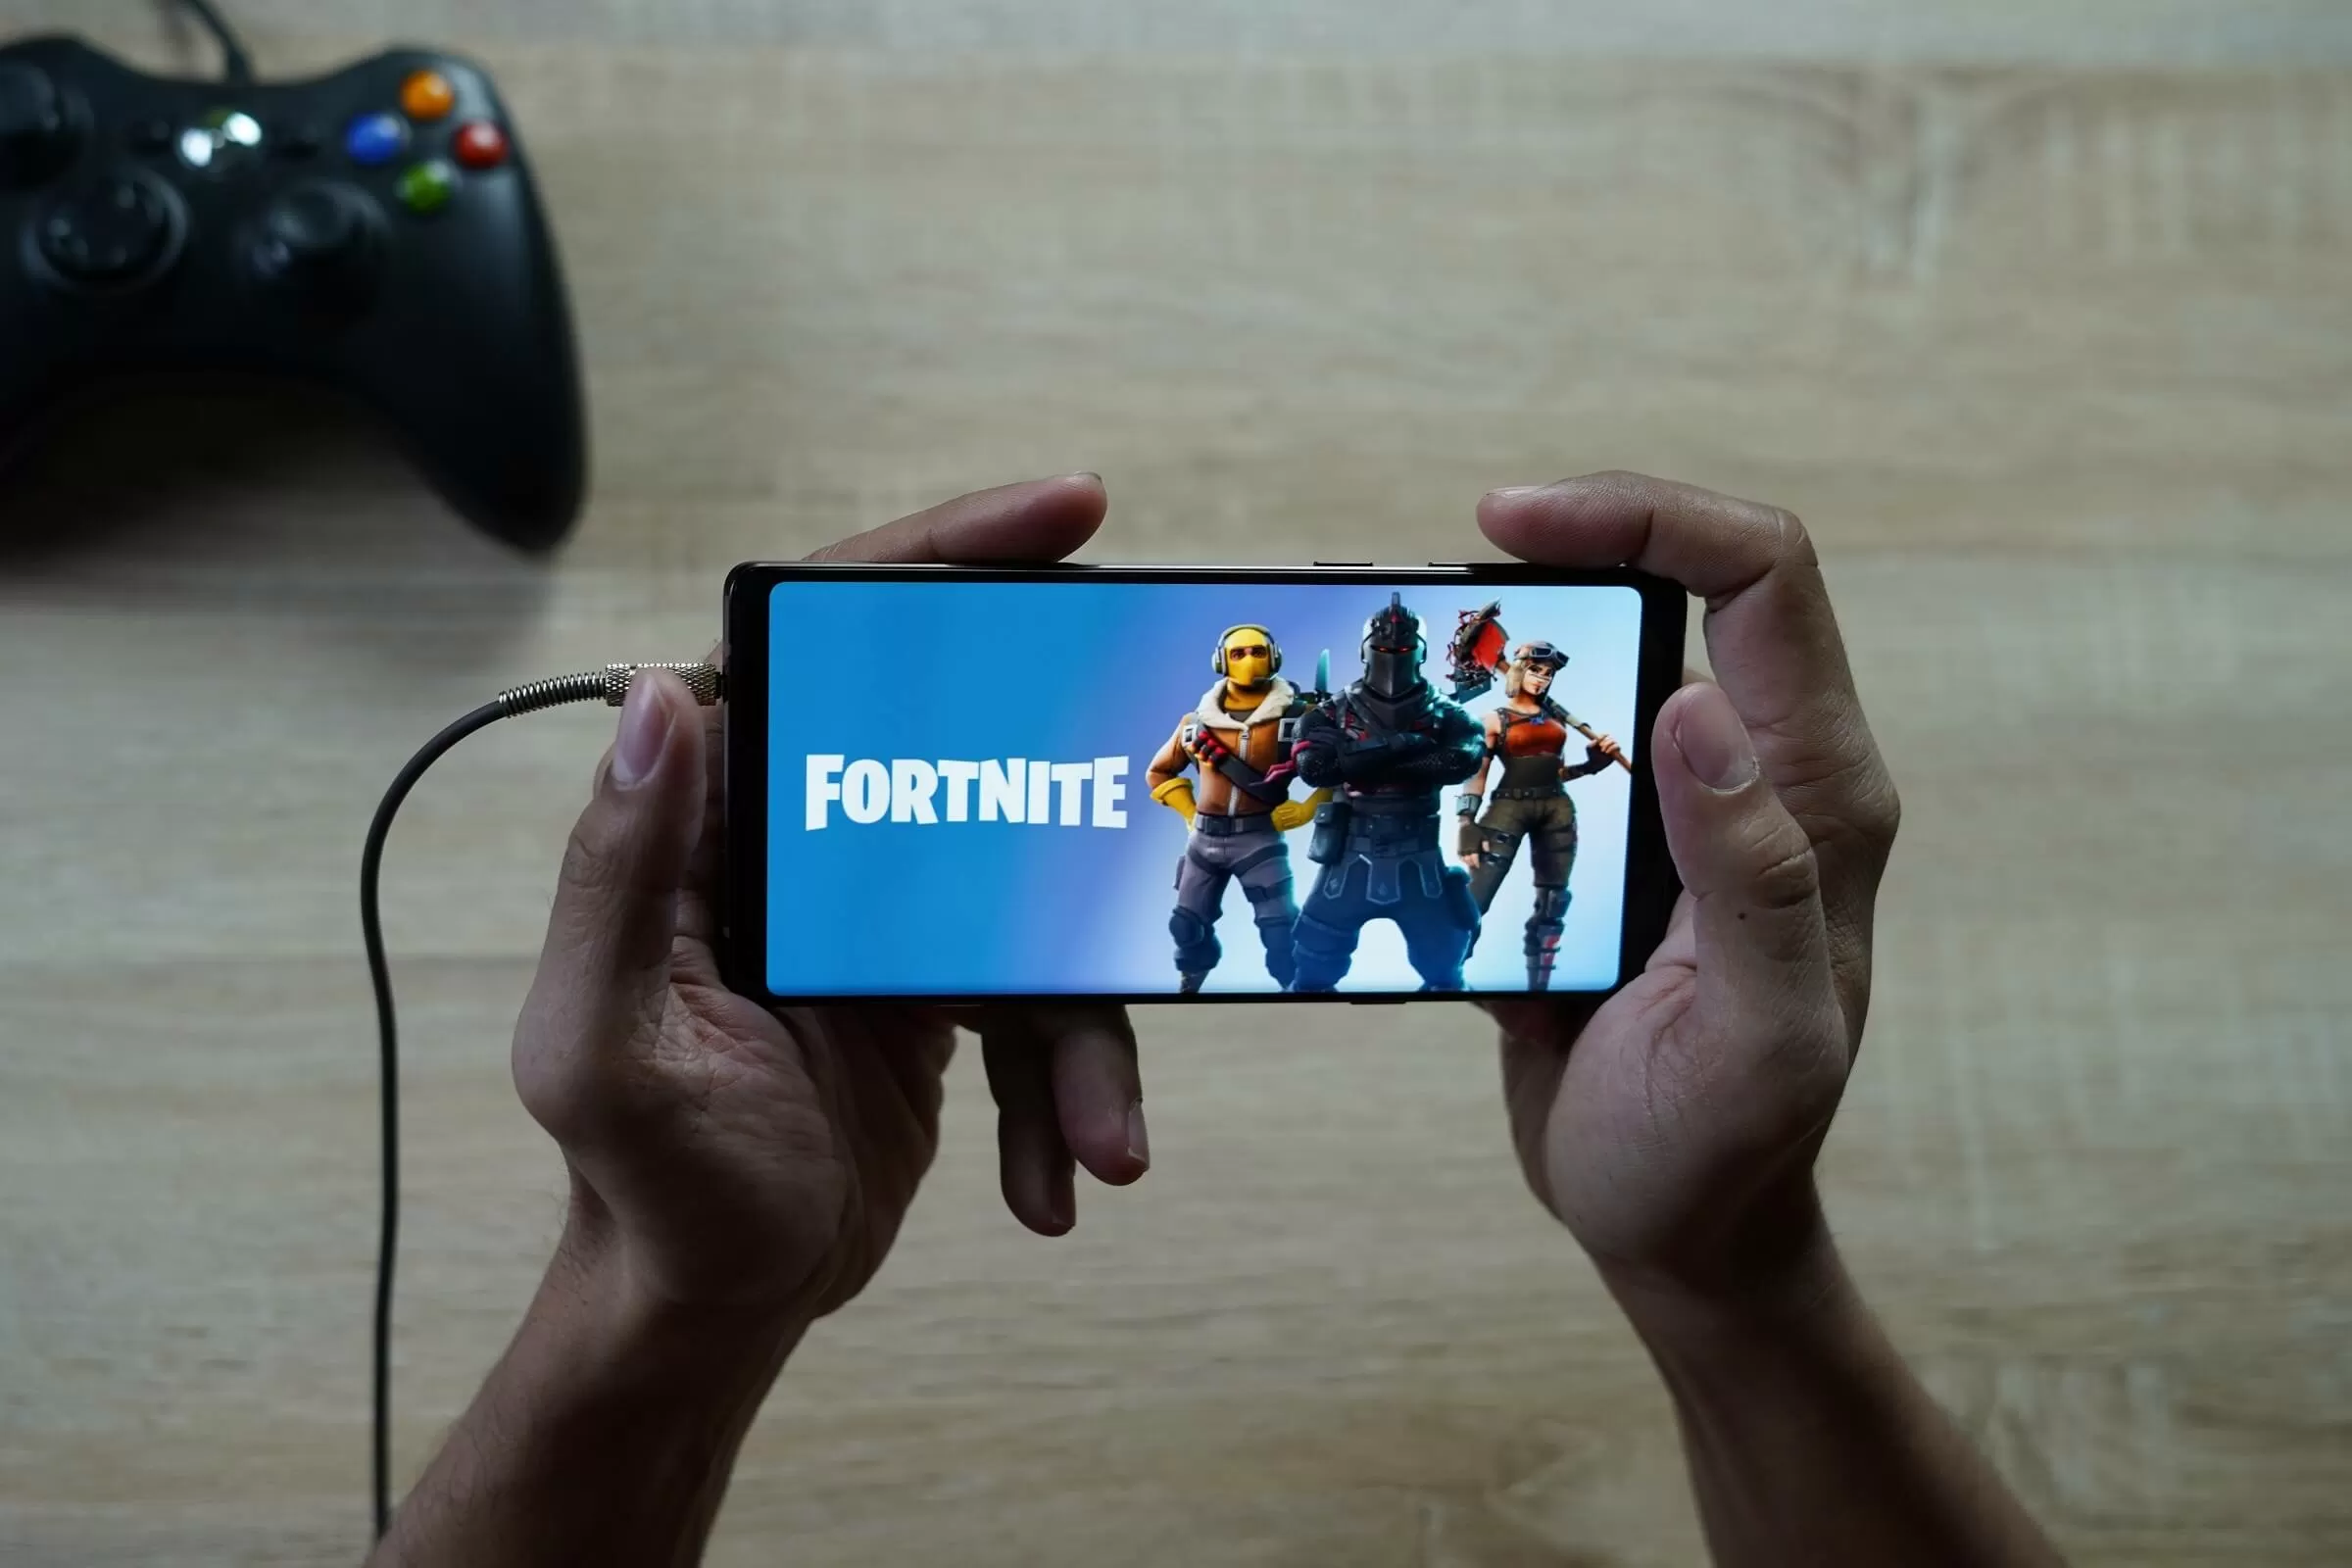 Fortnite made $2.4 billion in 2018 as free-to-play and mobile games dominated the market